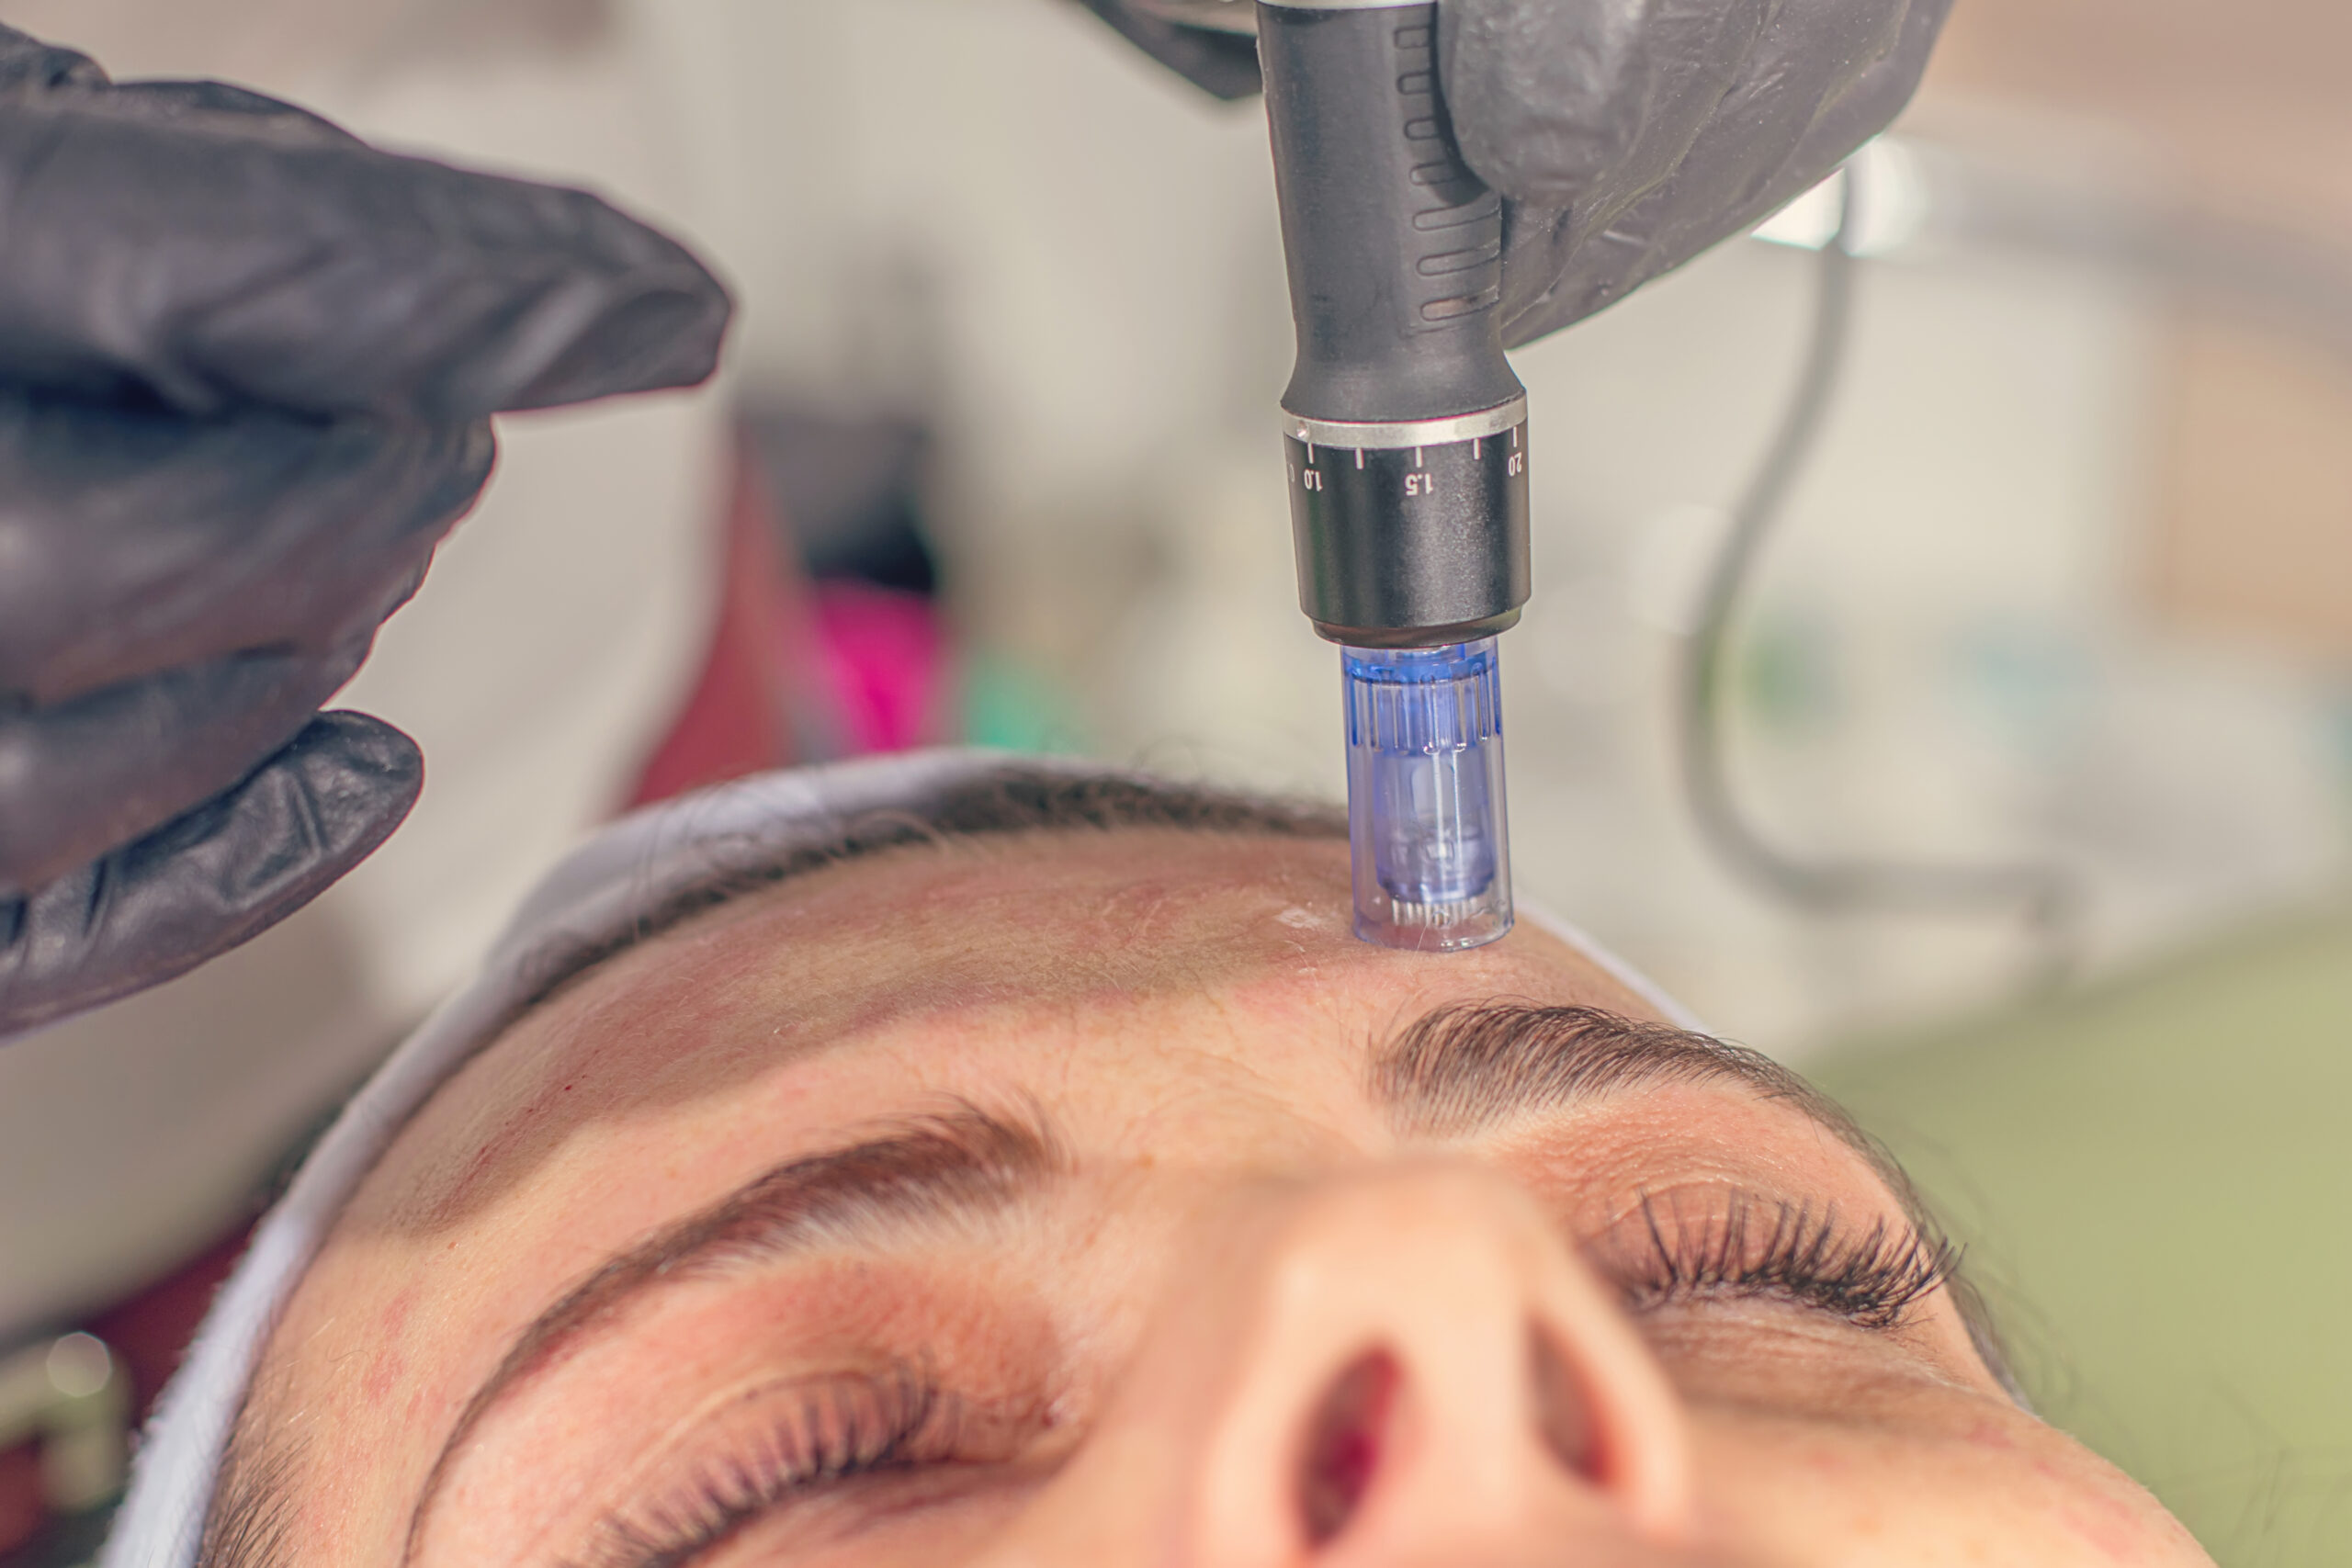 Microneedling on a woman's face